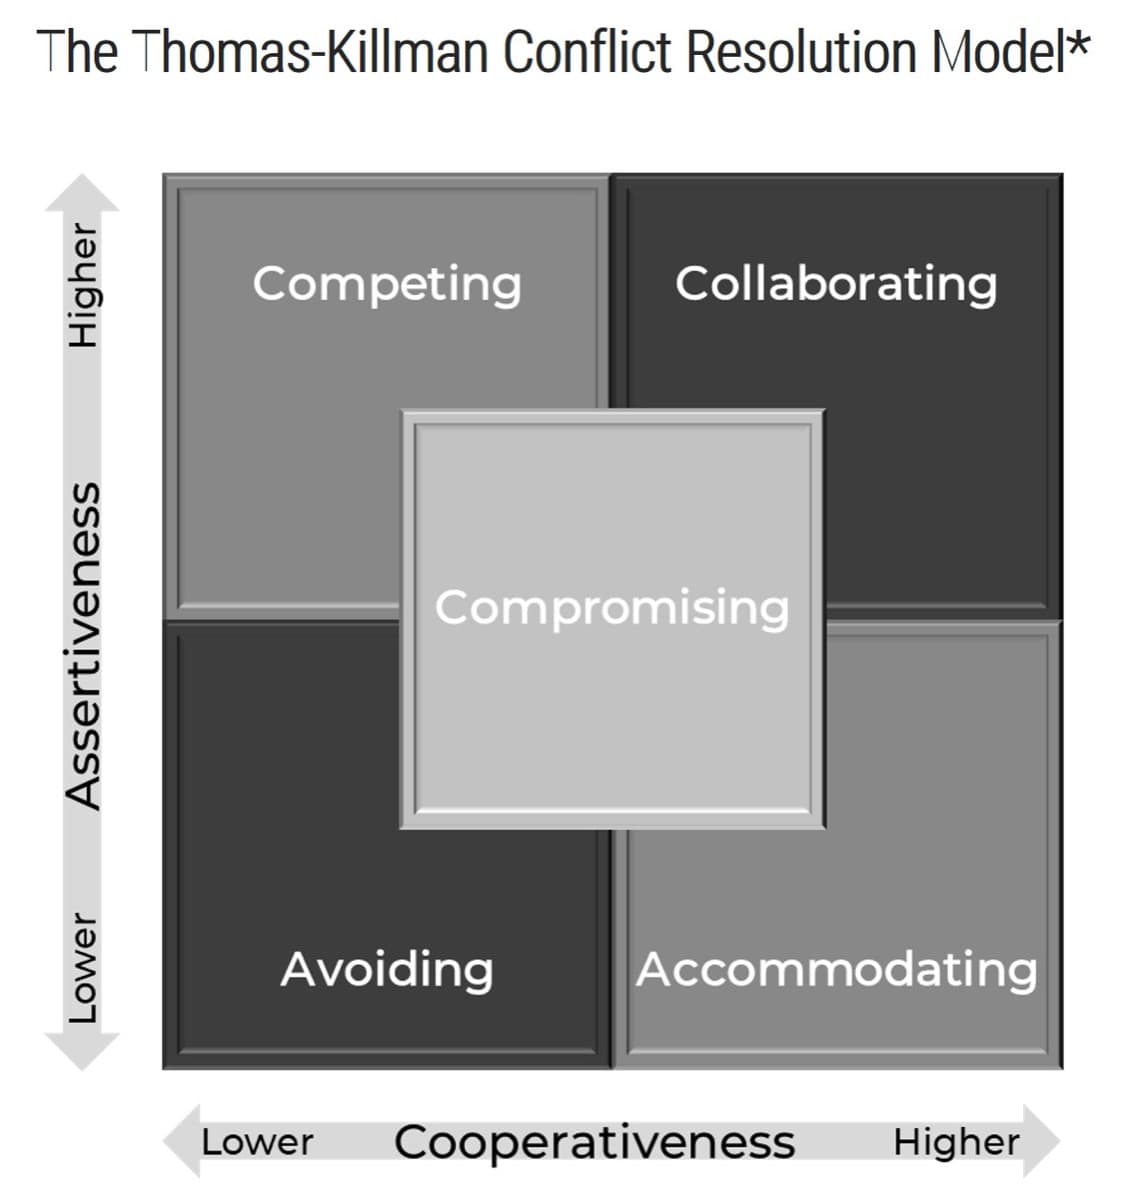 The image contains a screenshot of The Thomas-Kilman Conflict Resolution Model.